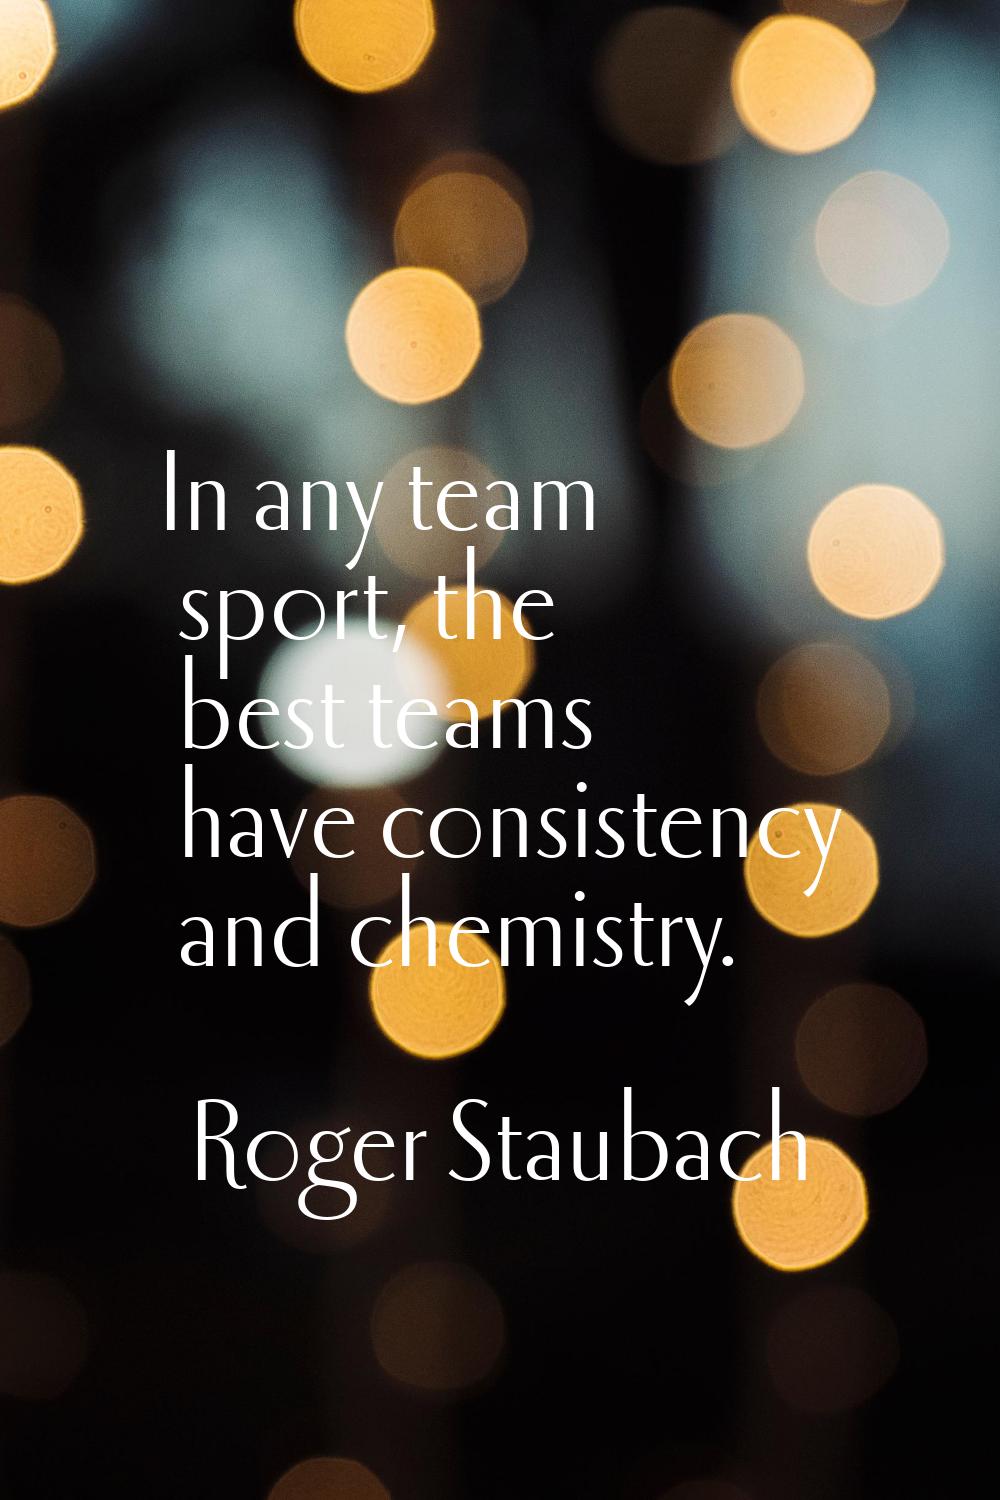 In any team sport, the best teams have consistency and chemistry.